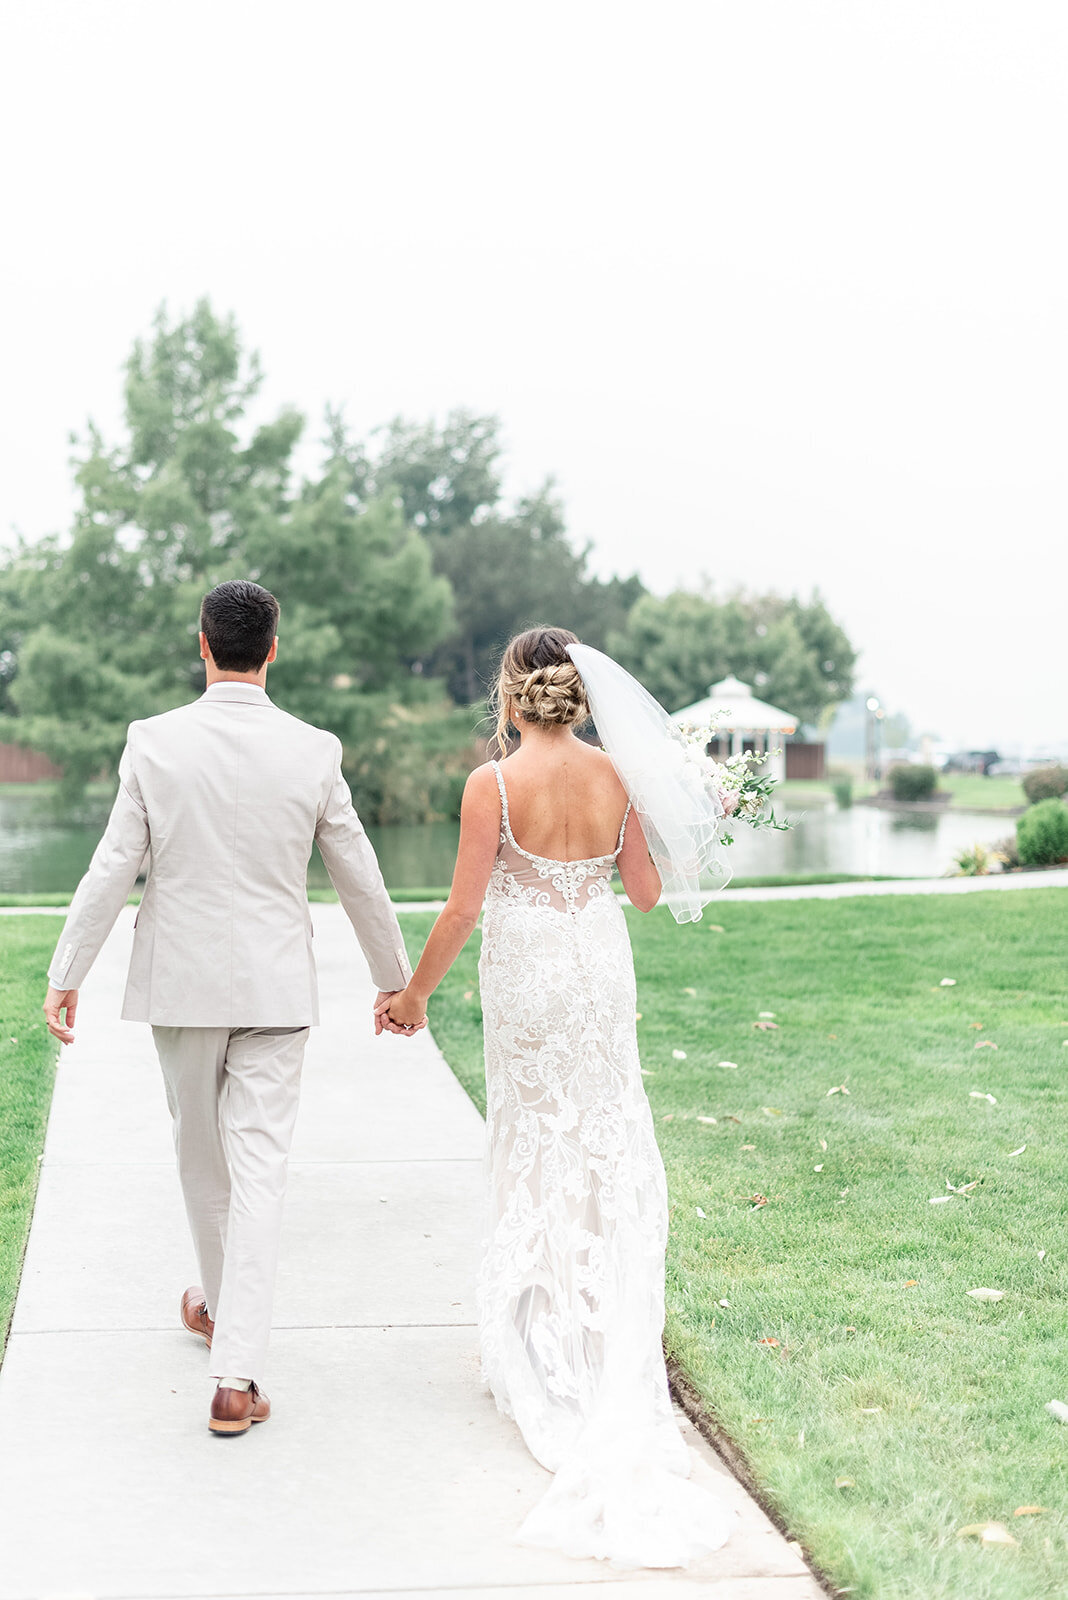 Light and airy wedding photography by the Best Boise Wedding Photographers